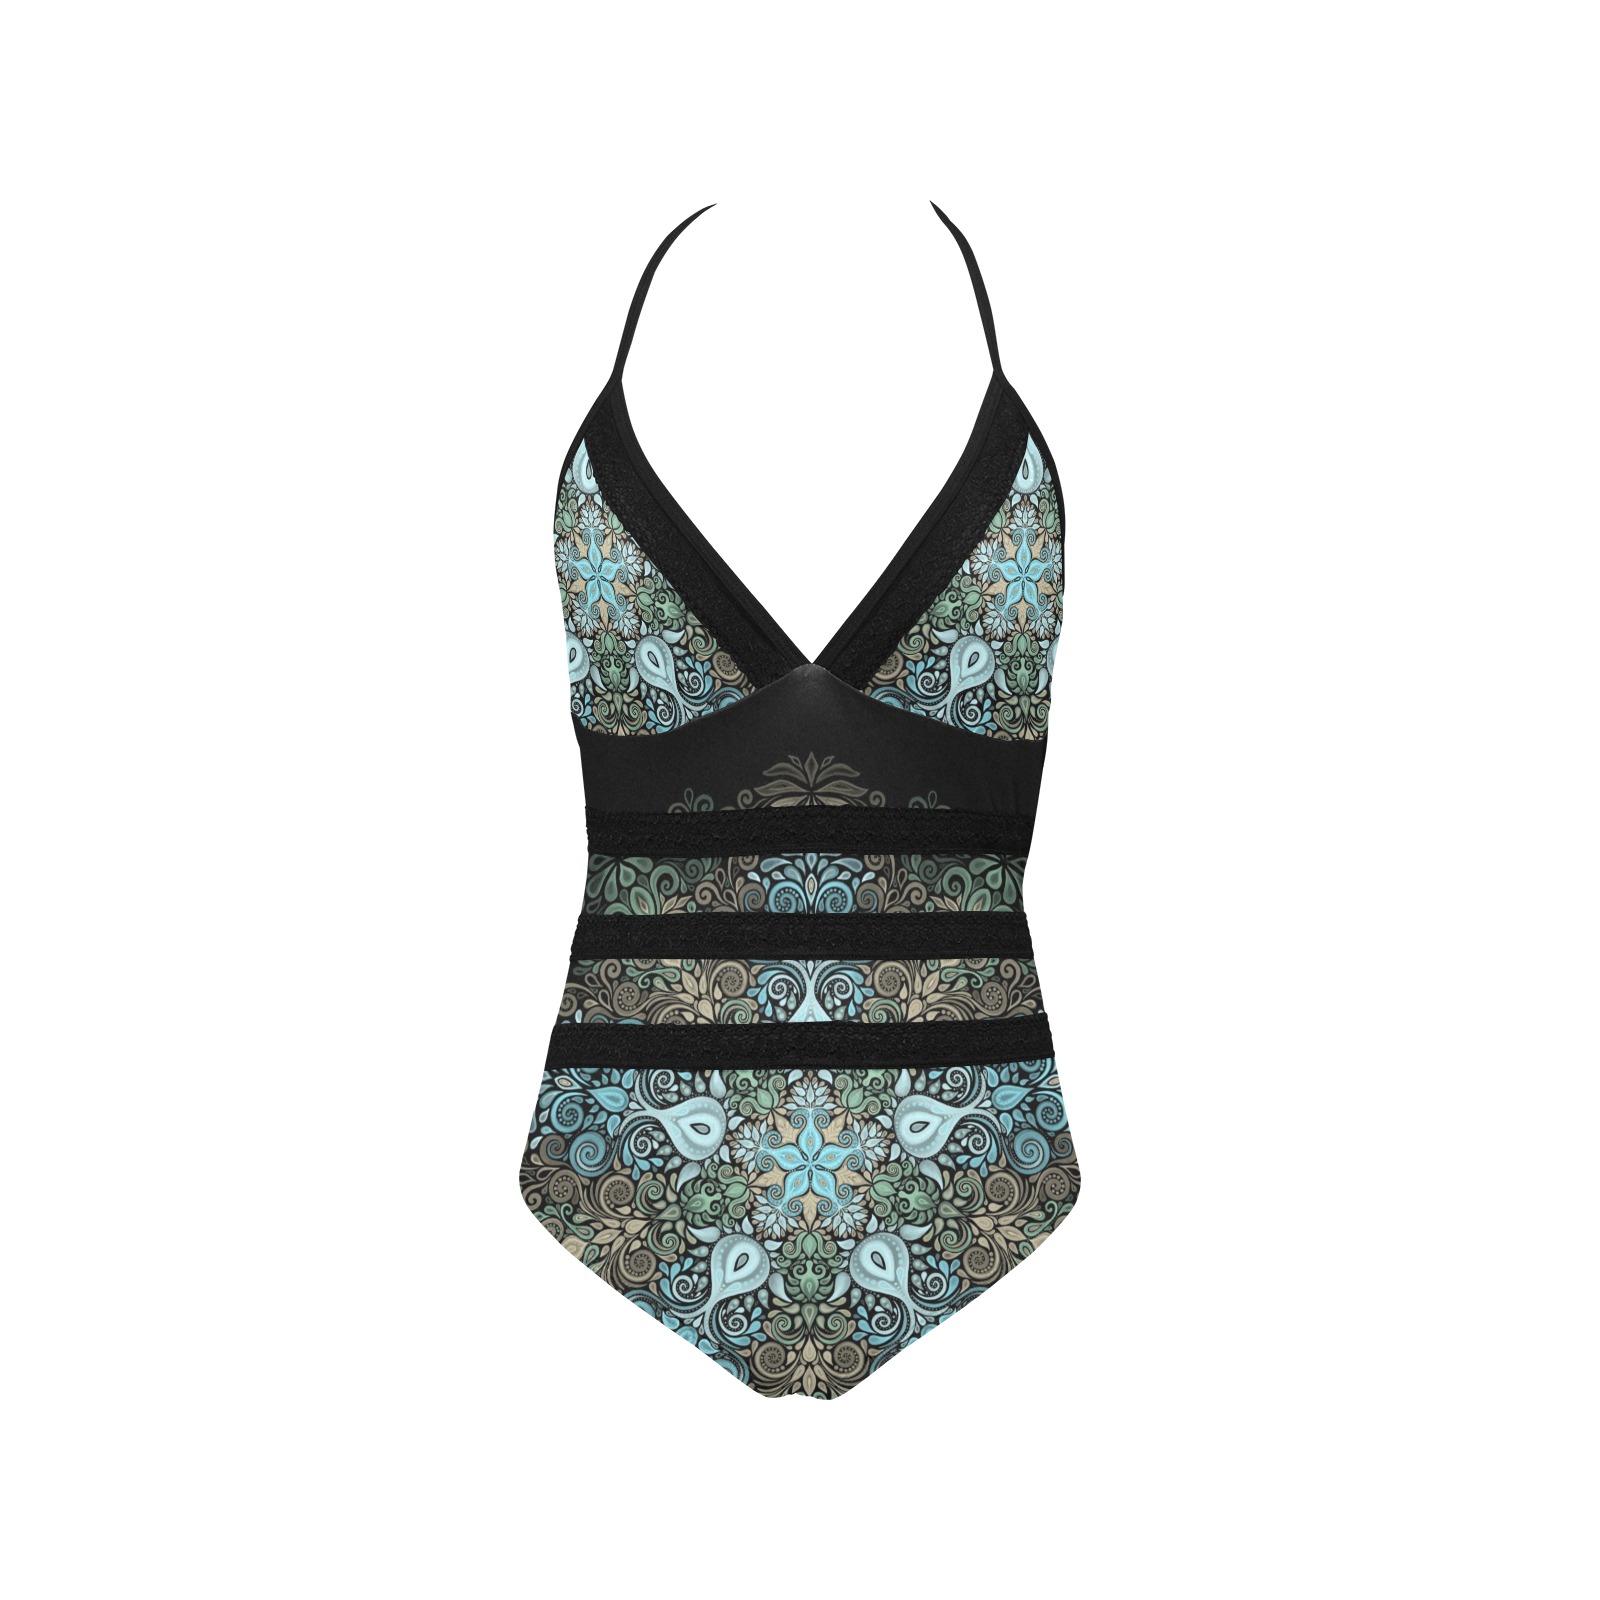 Baroque Garden Watercolor Turquoise Mandala Lace Band Embossing Swimsuit (Model S15)